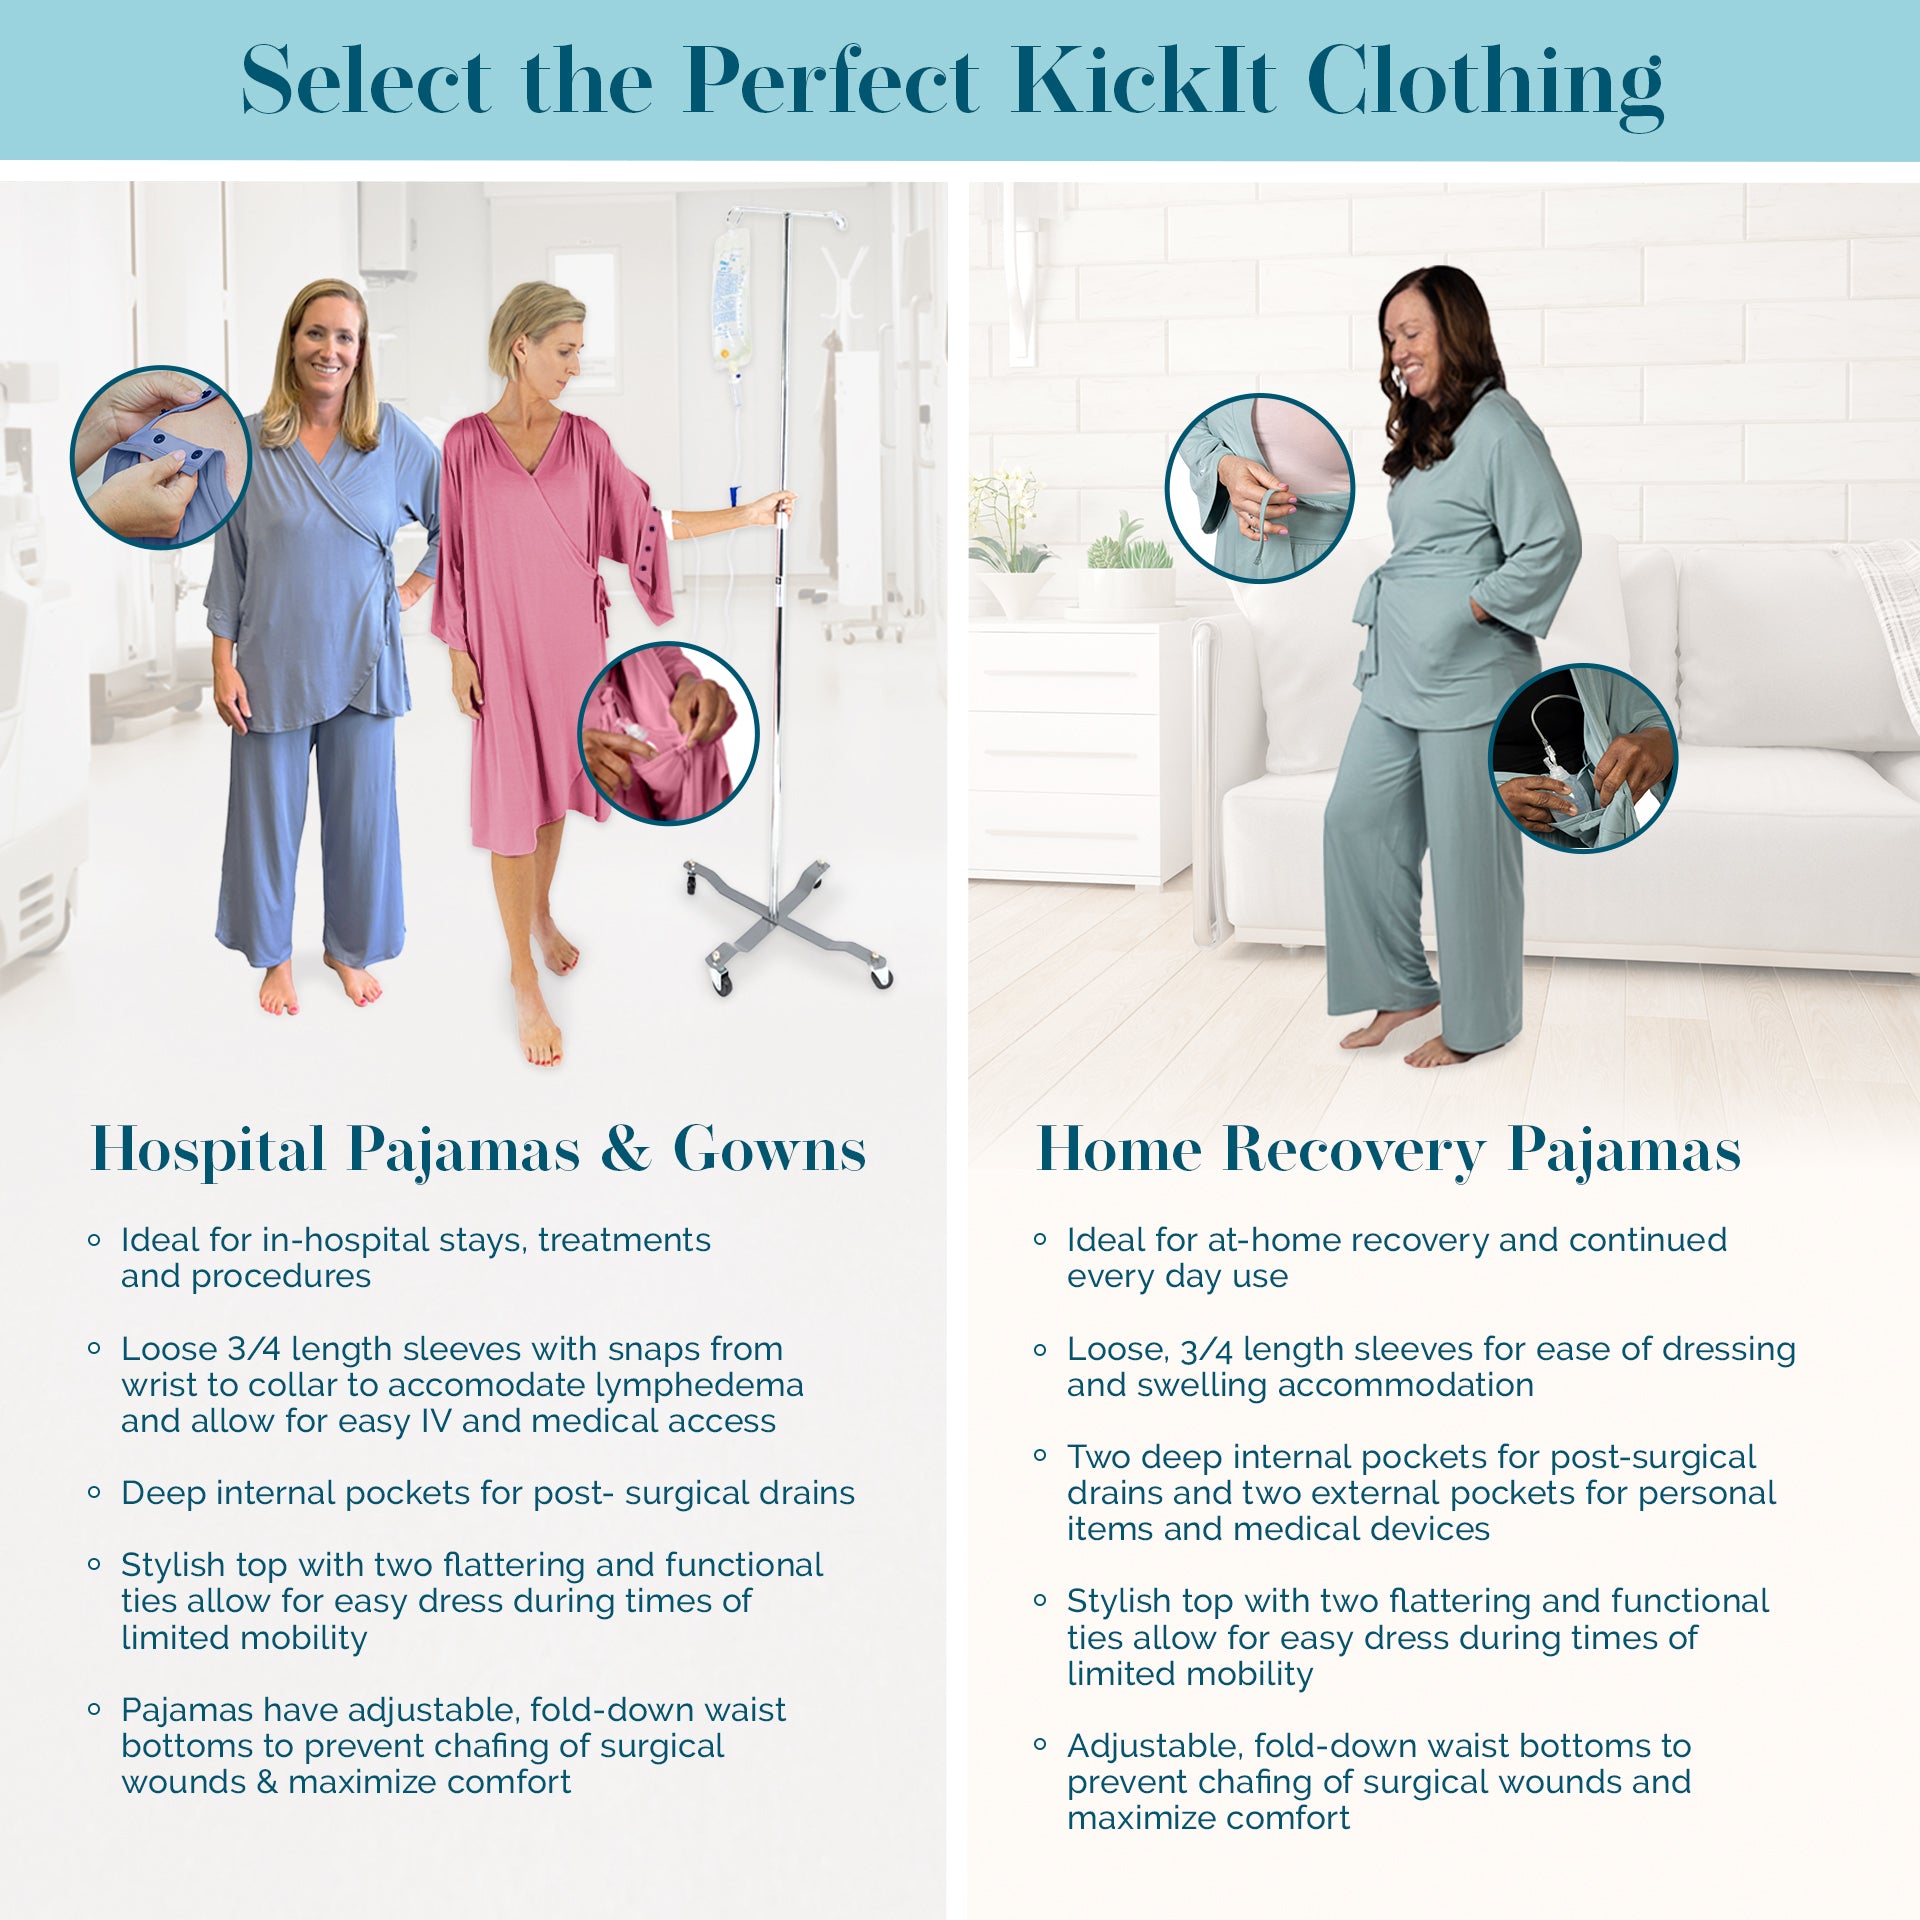 Selecting the perfect clothing for where you are on your cancer journey we sell hospital gowns and pajamas with snap sleeves for ivs and chemo ports and also mastectomy pajamas with internal drain pockets and adjustable waistbands for surgical wounds